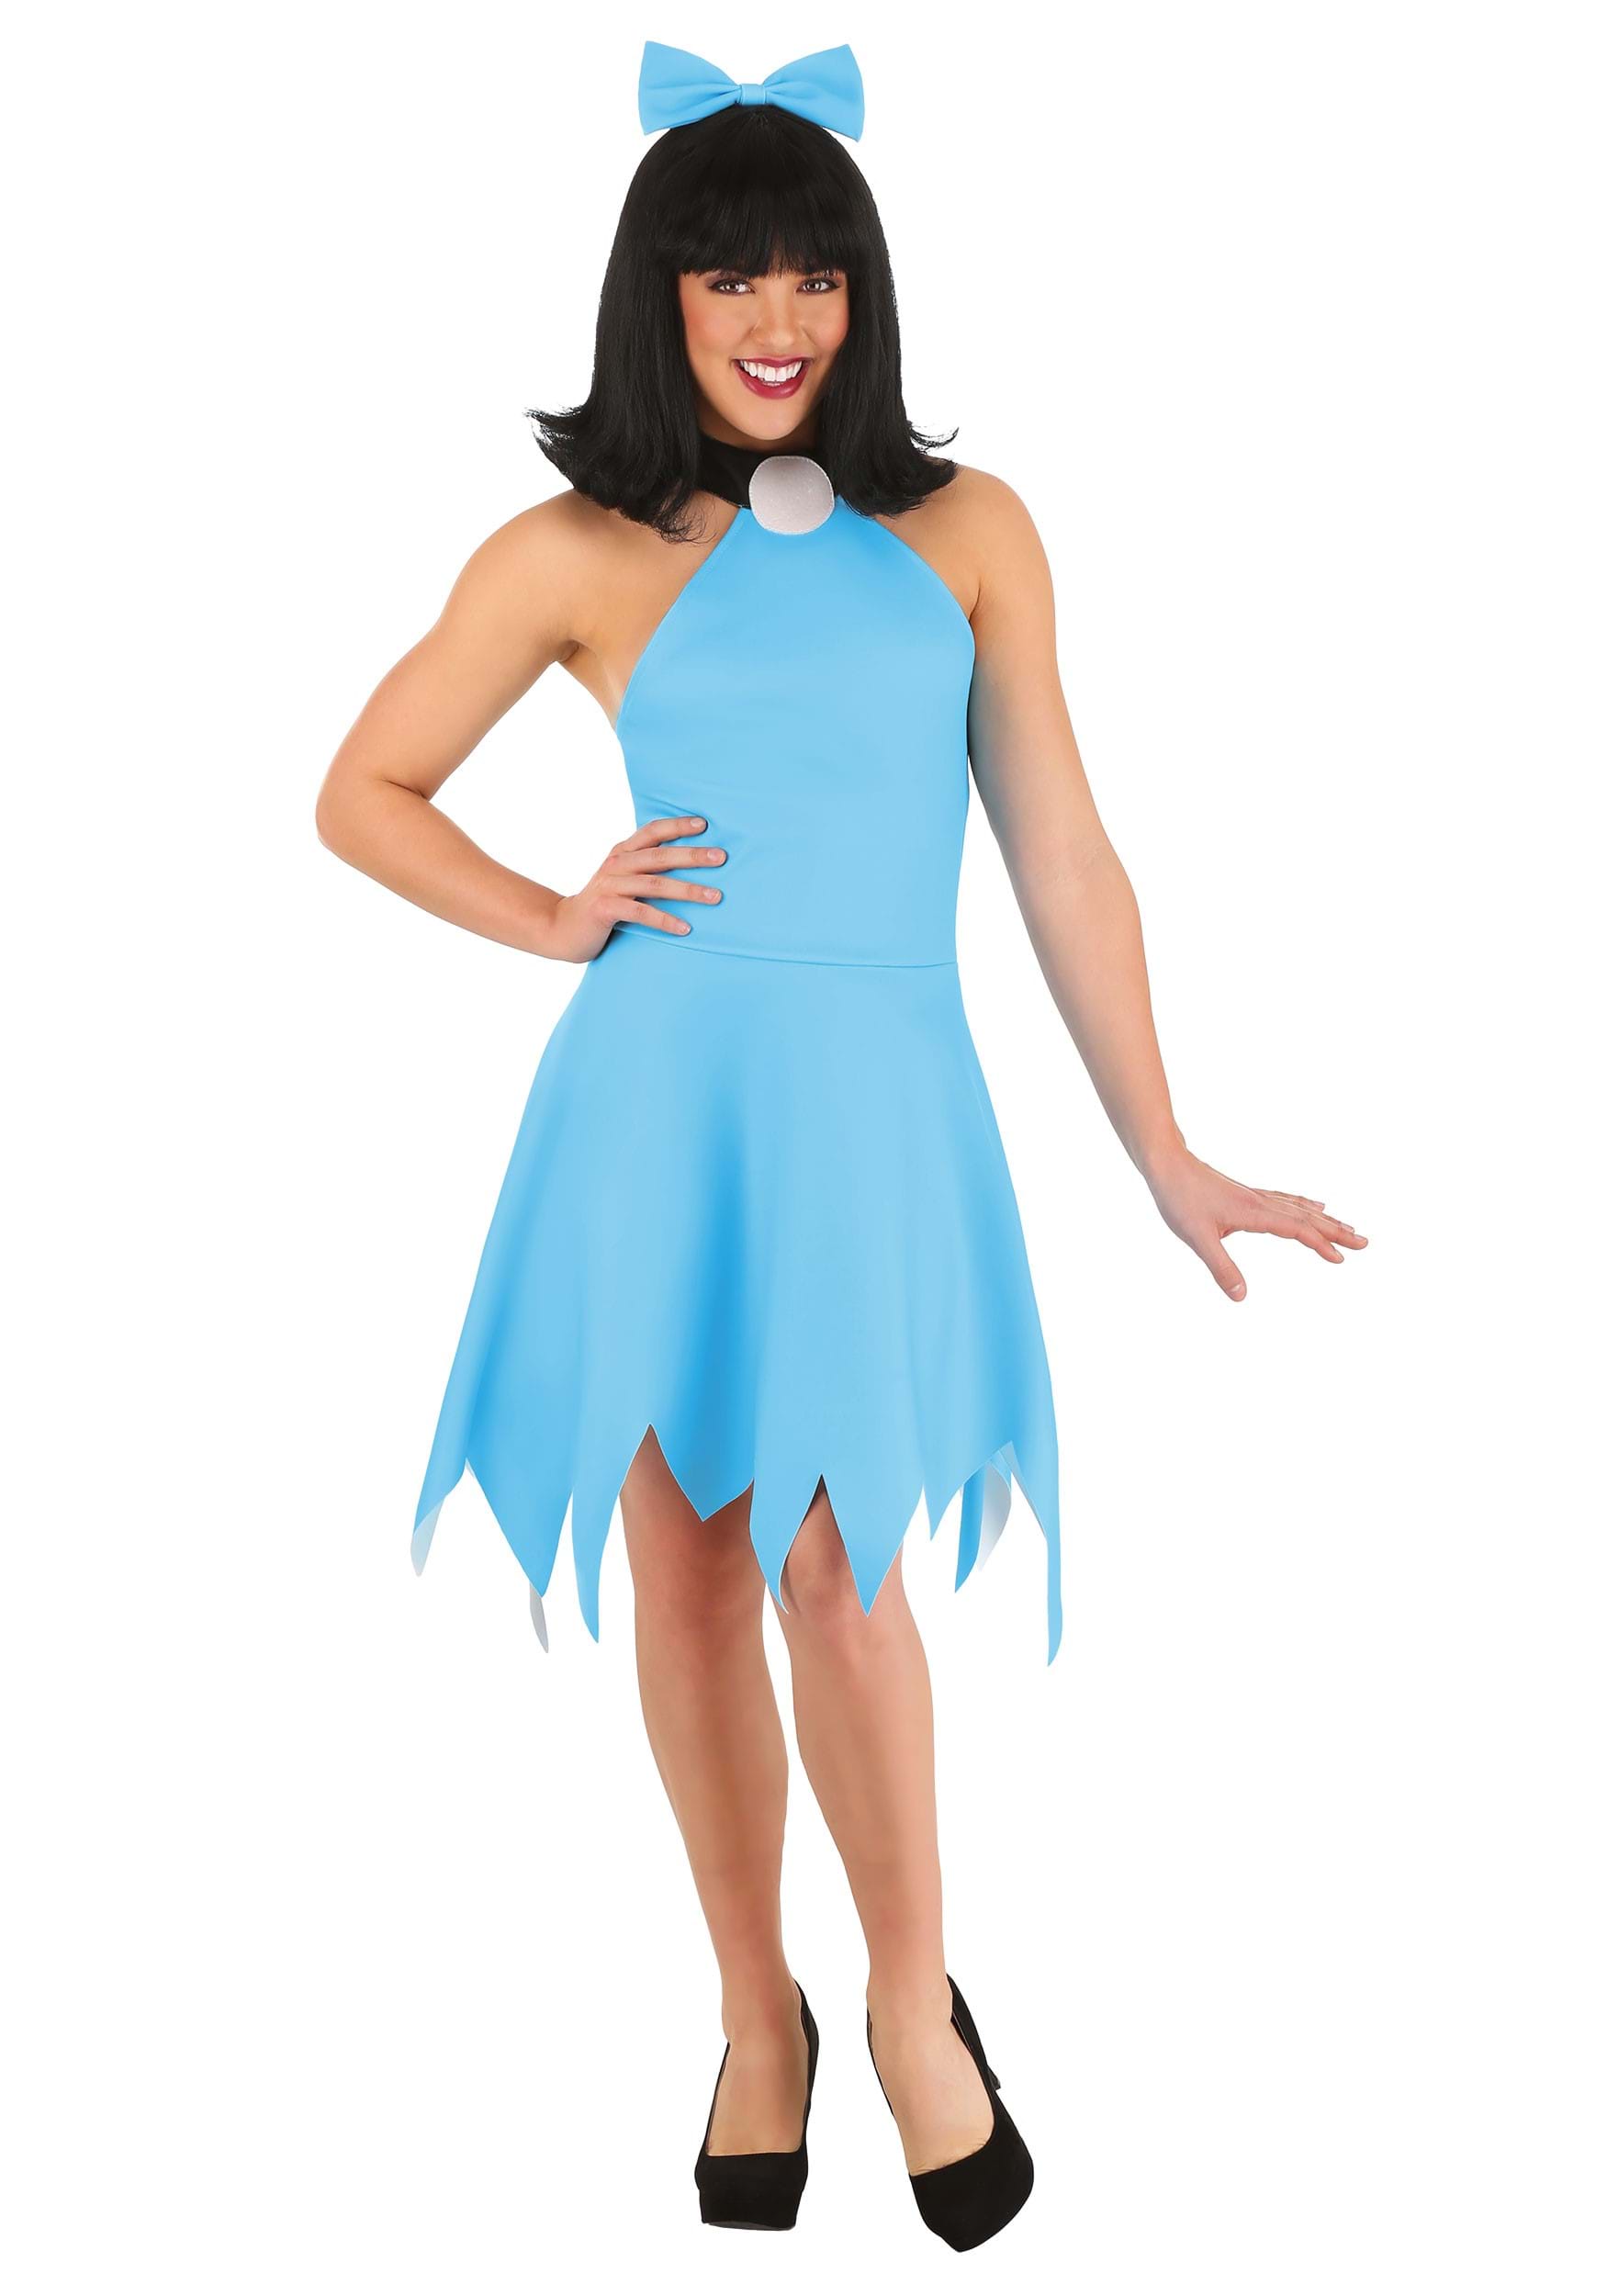 https://images.halloweencostumes.ca/products/64110/1-1/plus-size-betty-rubble-costume-1-update.jpg